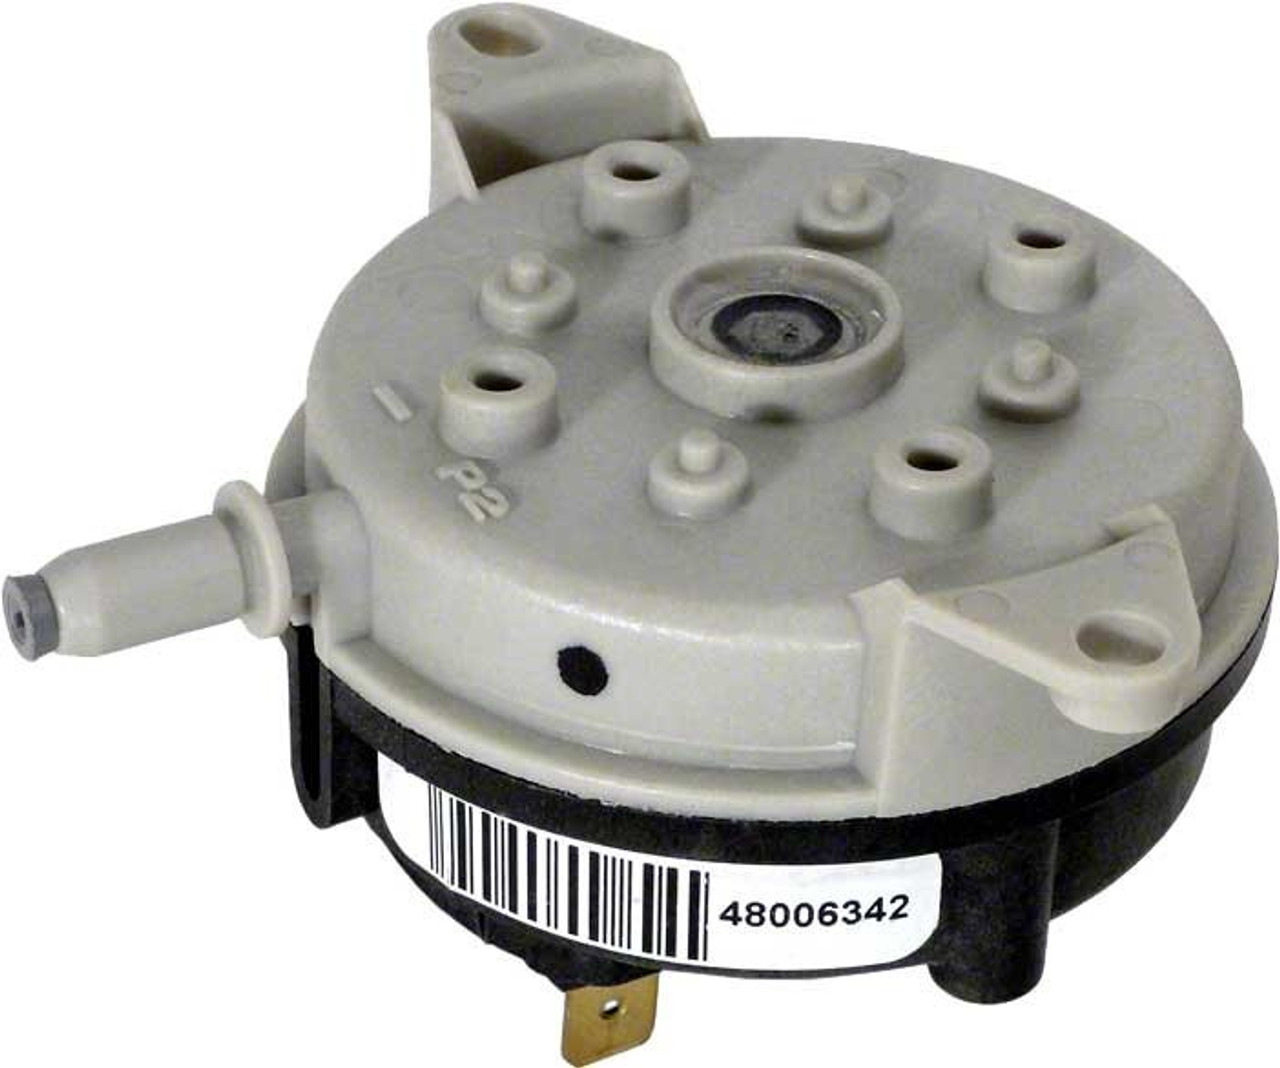 Pentair 472182 Yellow Air Pressure Switch Replacement MiniMax Pool/Spa Heater 